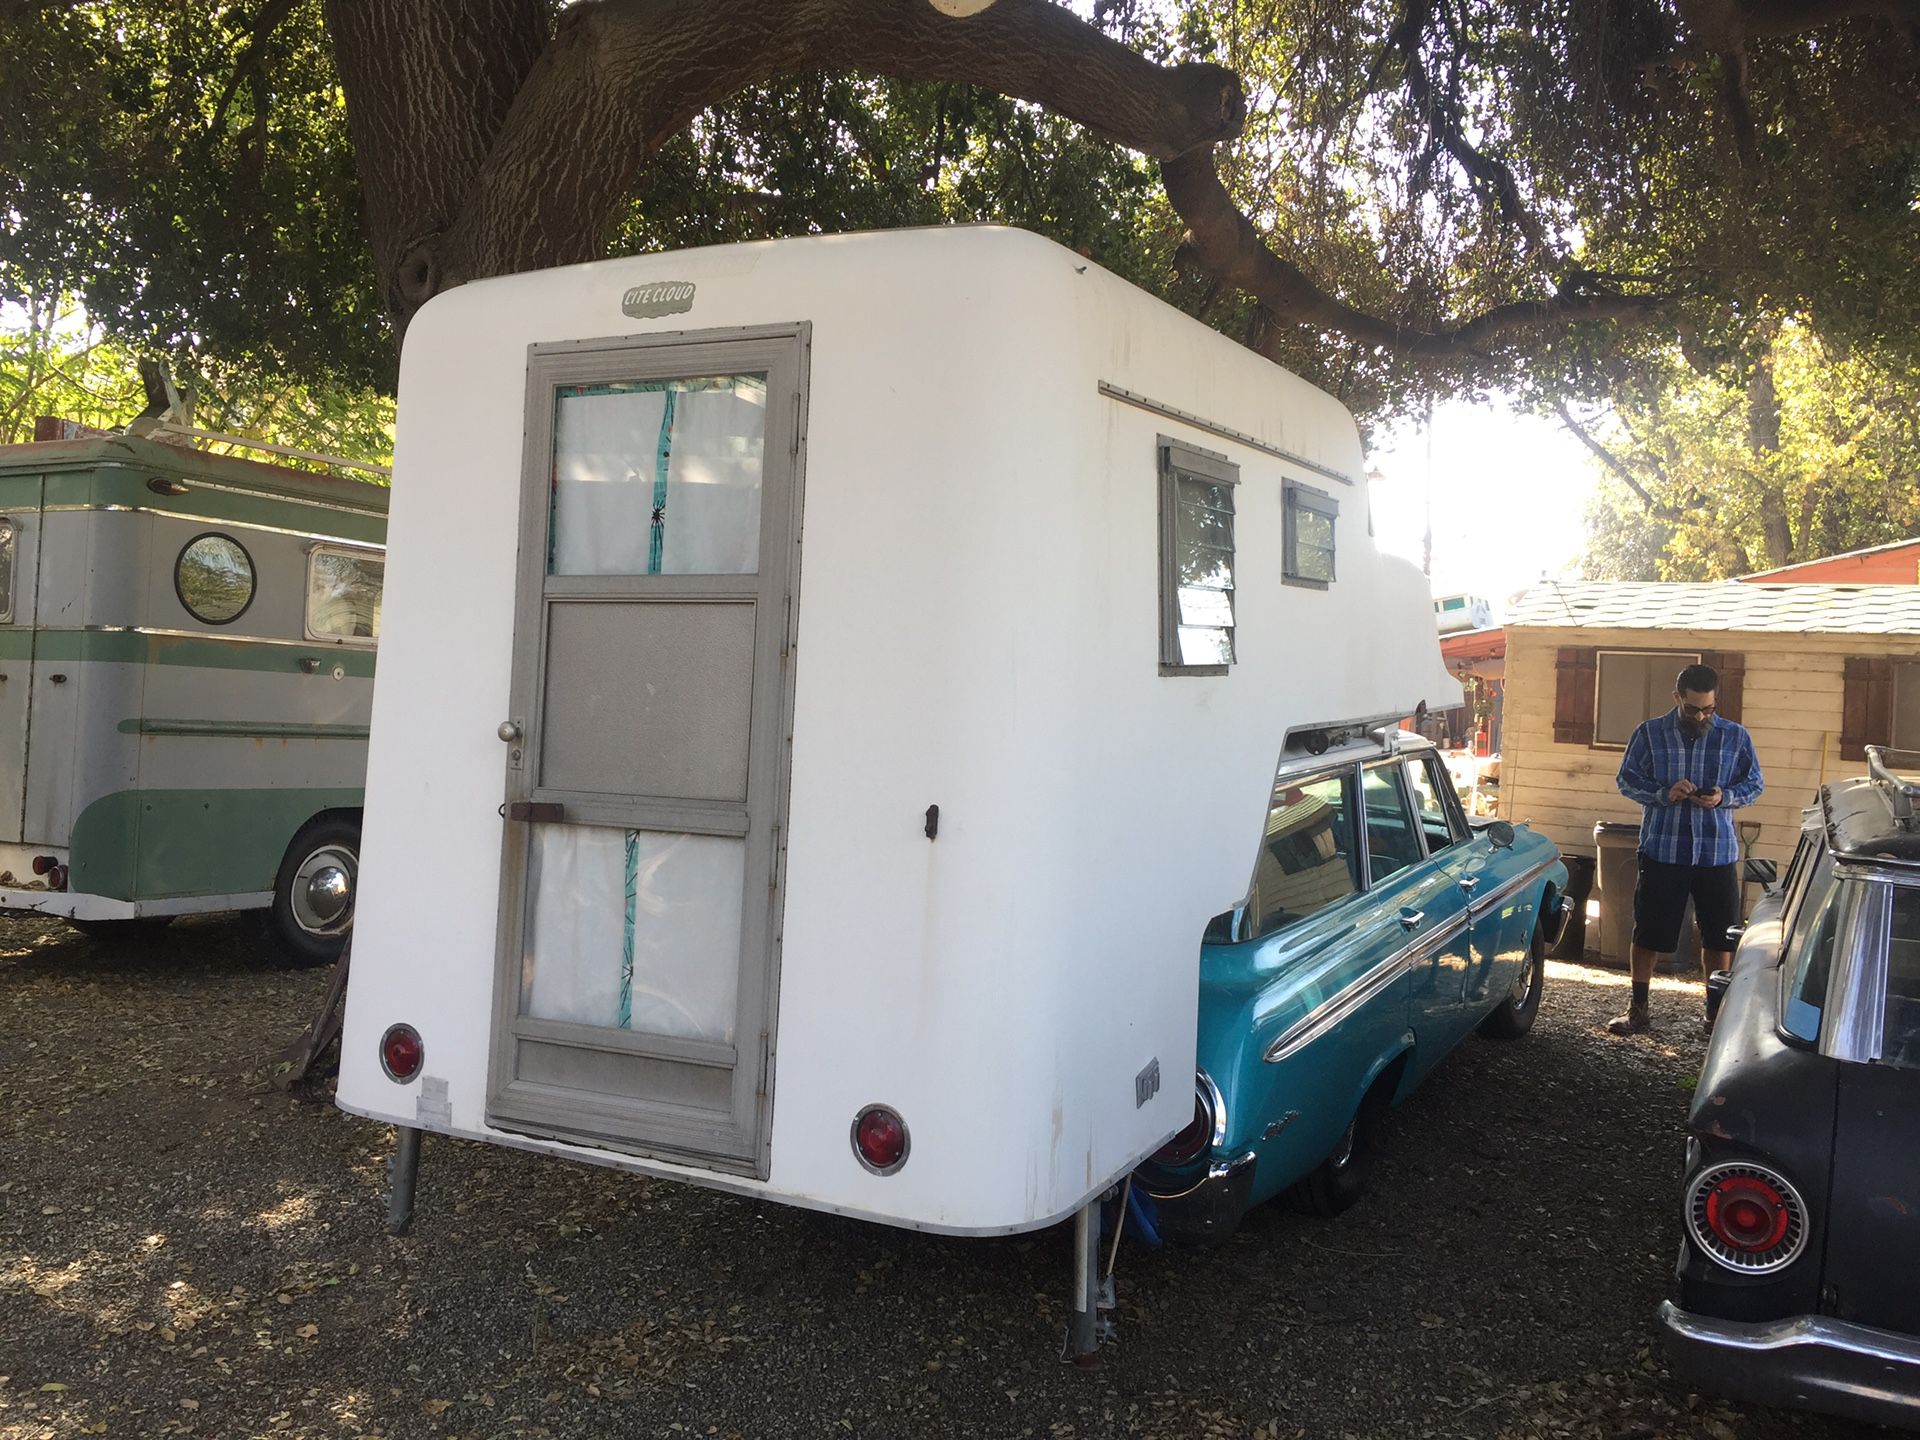 Very rare 1966 “Litehouse Tote motel” Station Wagon Camper, fits a full size mid-1960’s Station Wagon, fully equipped!! $2800.00